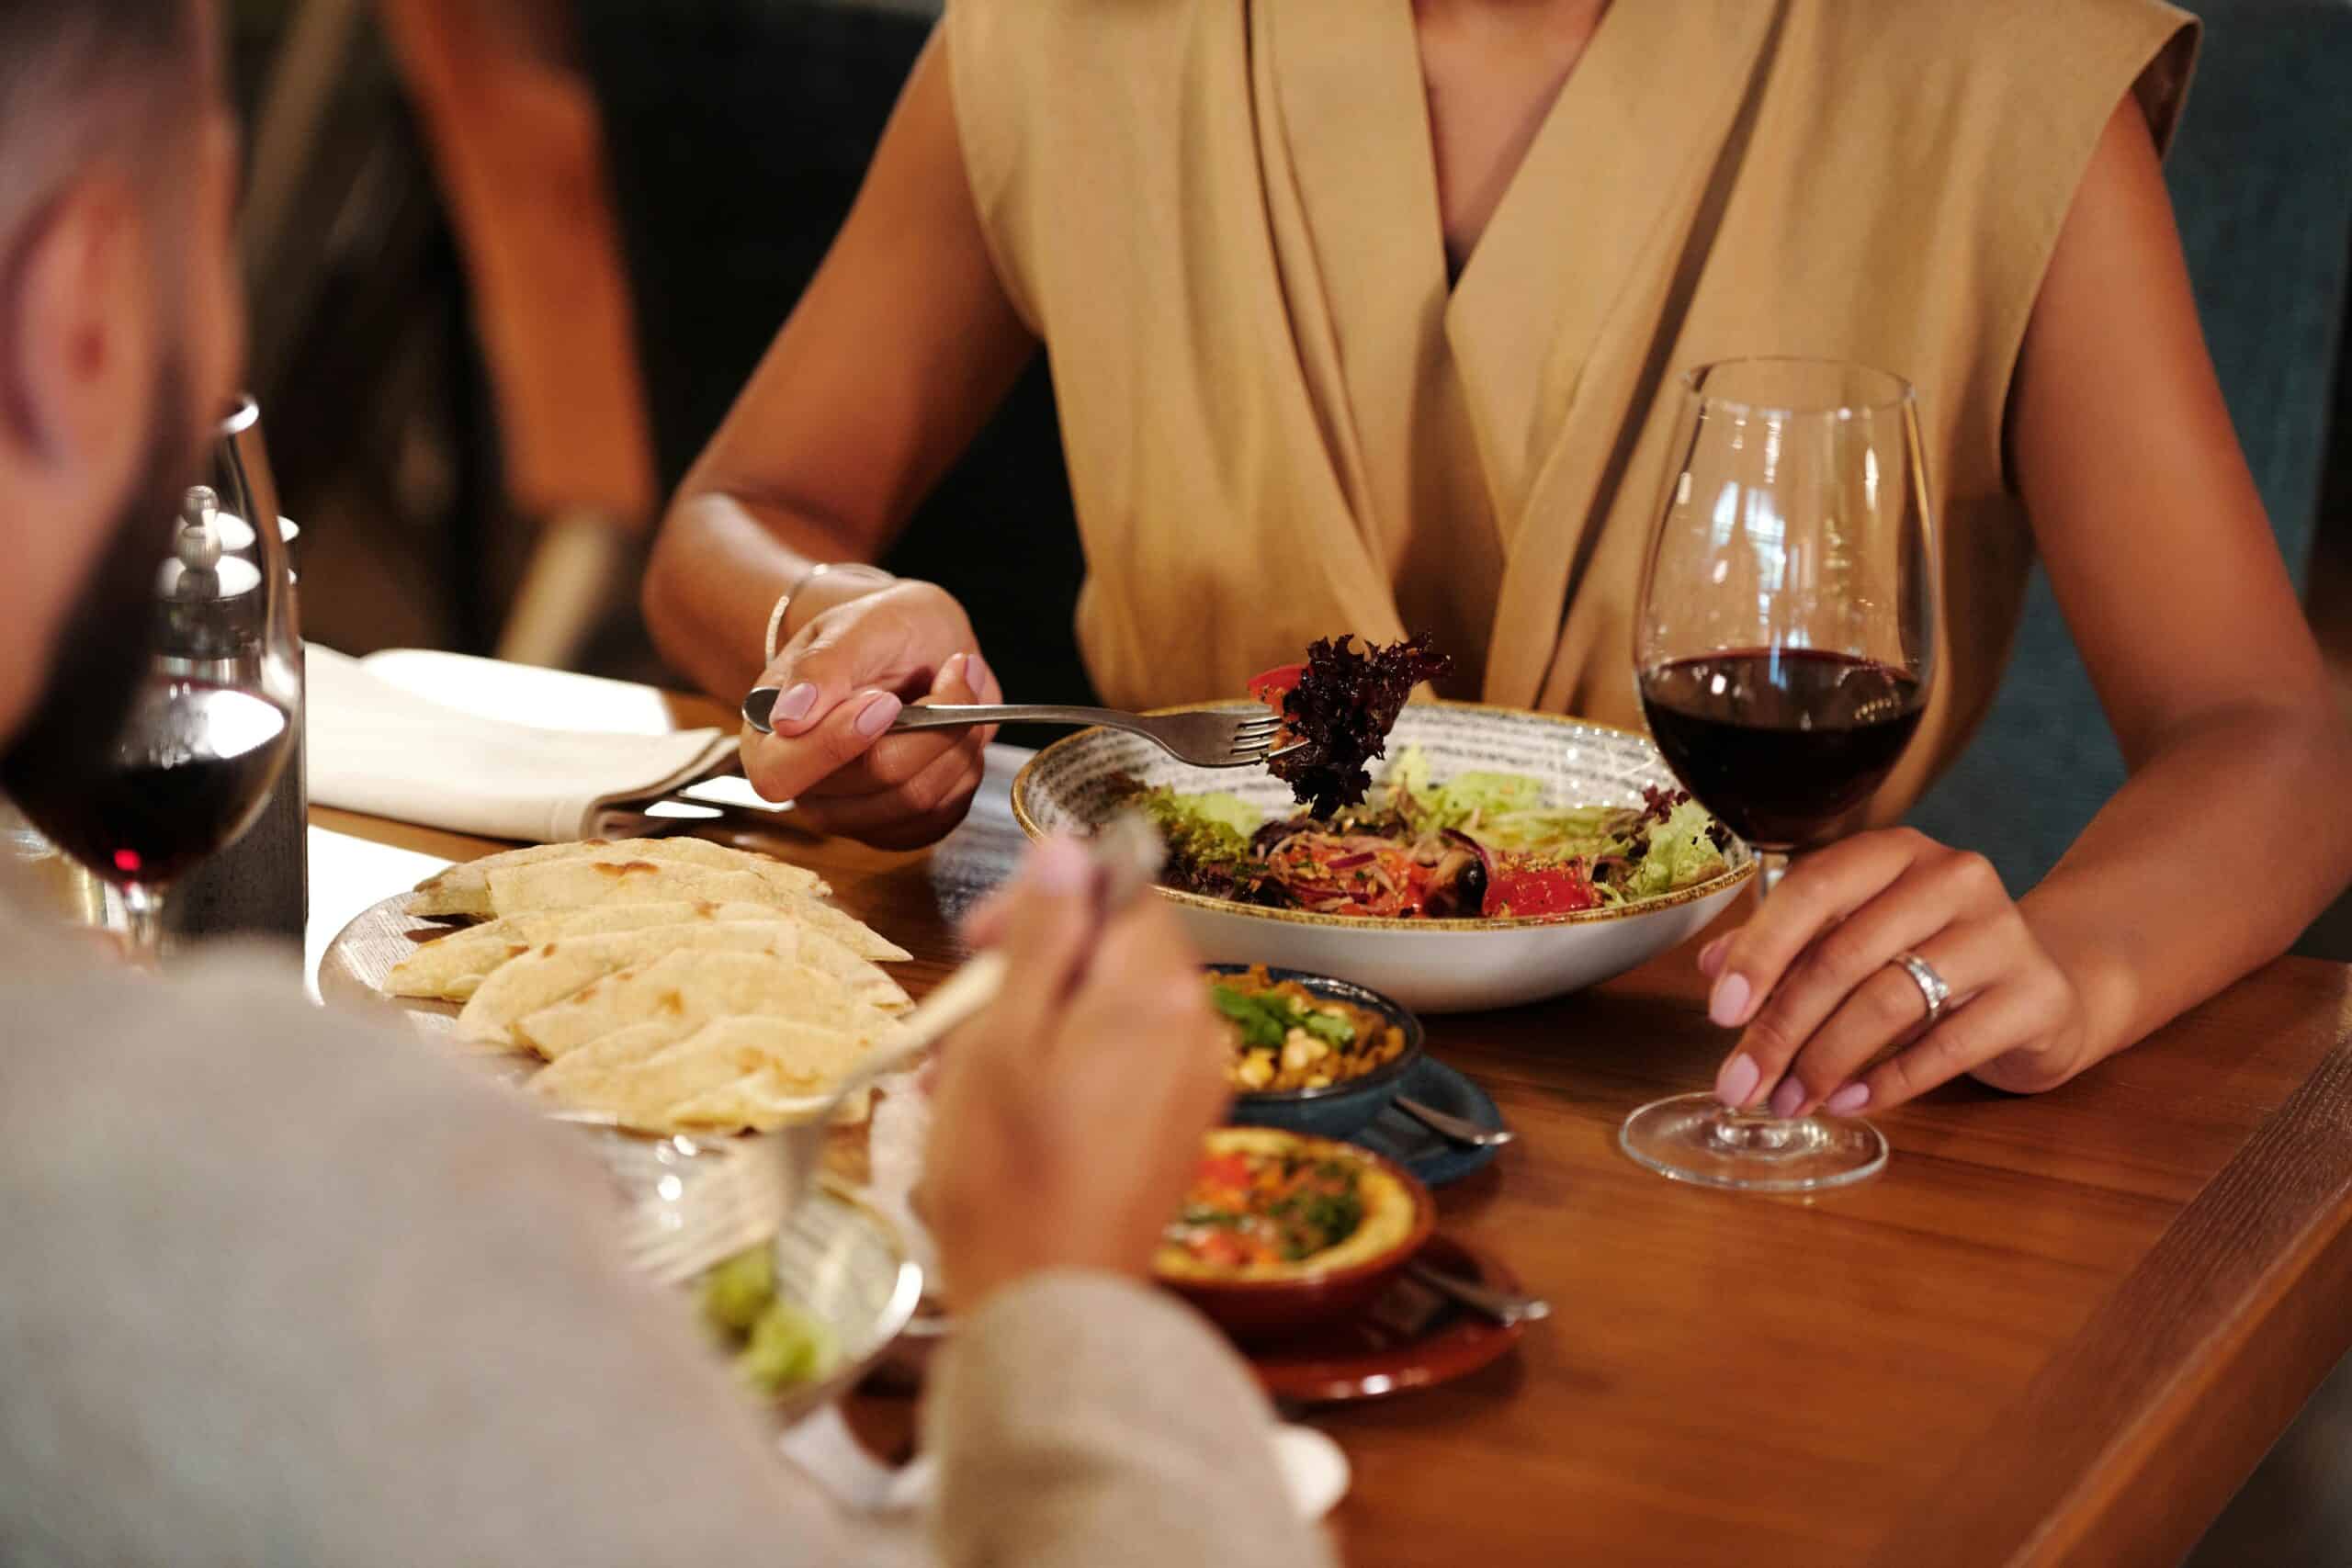 A couple rekindles connections over a healthy dinner, with a woman serving salad, surrounded by dishes and a glass of red wine.